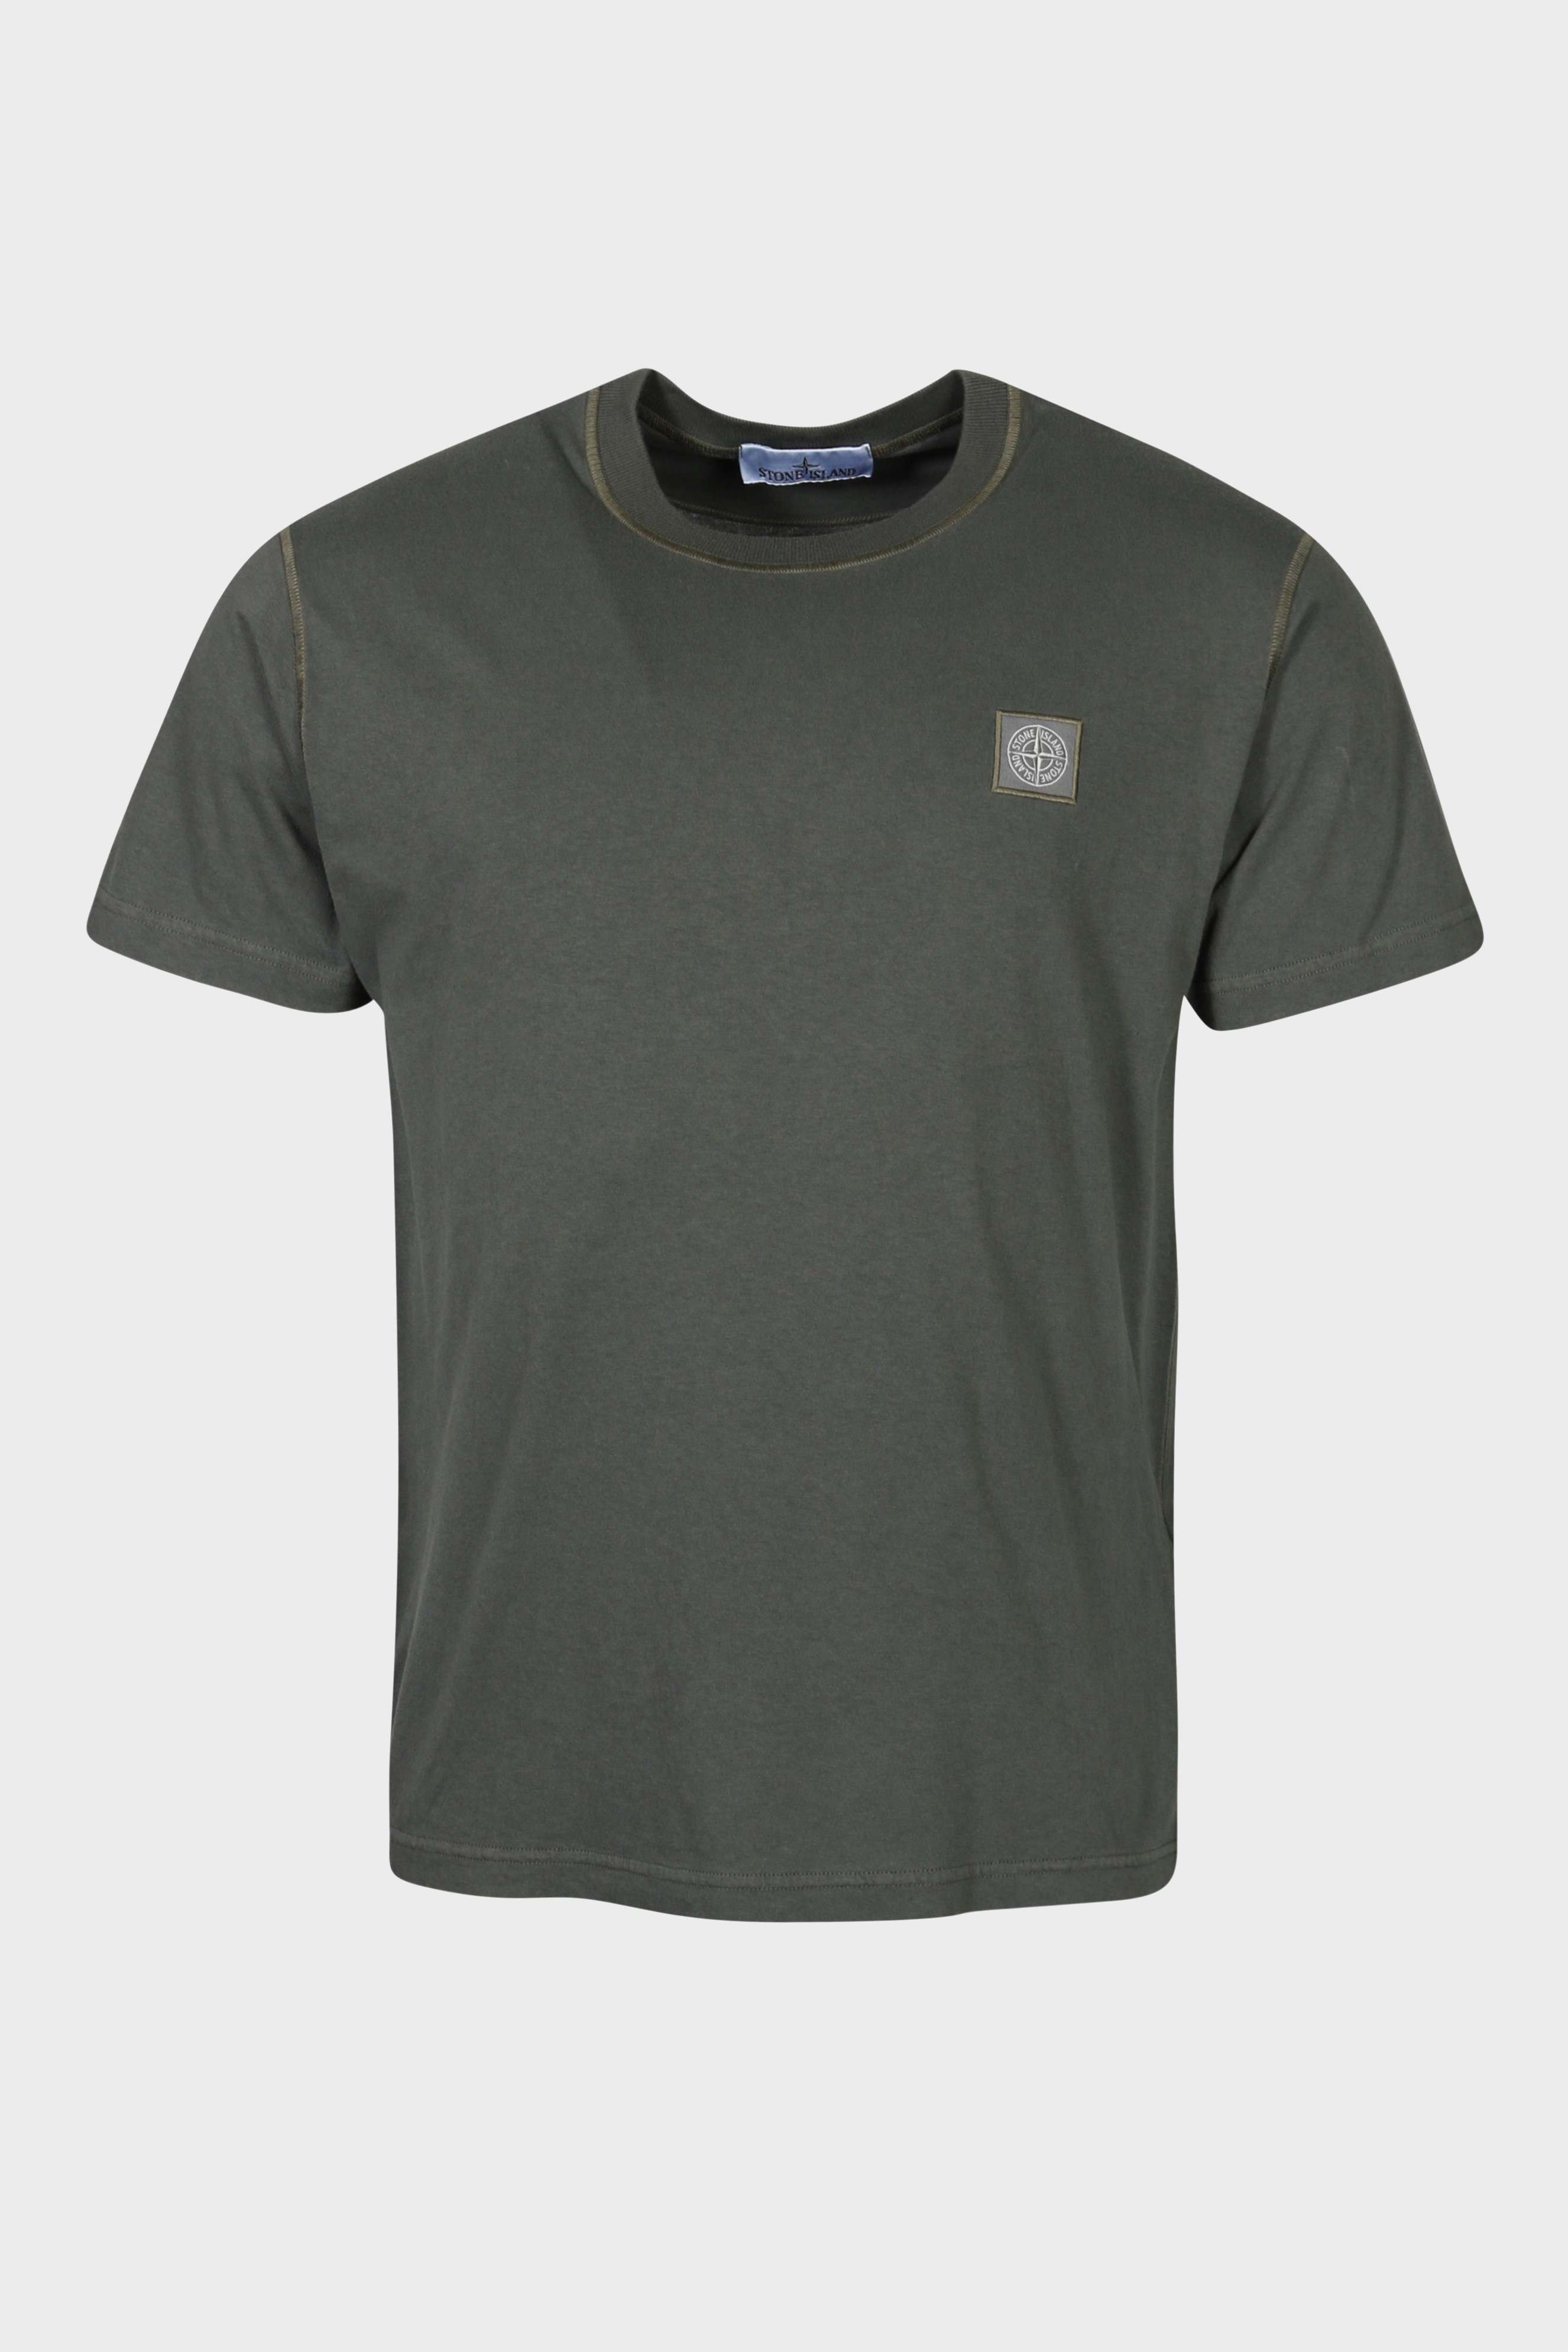 STONE ISLAND T-Shirt in Washed Green M